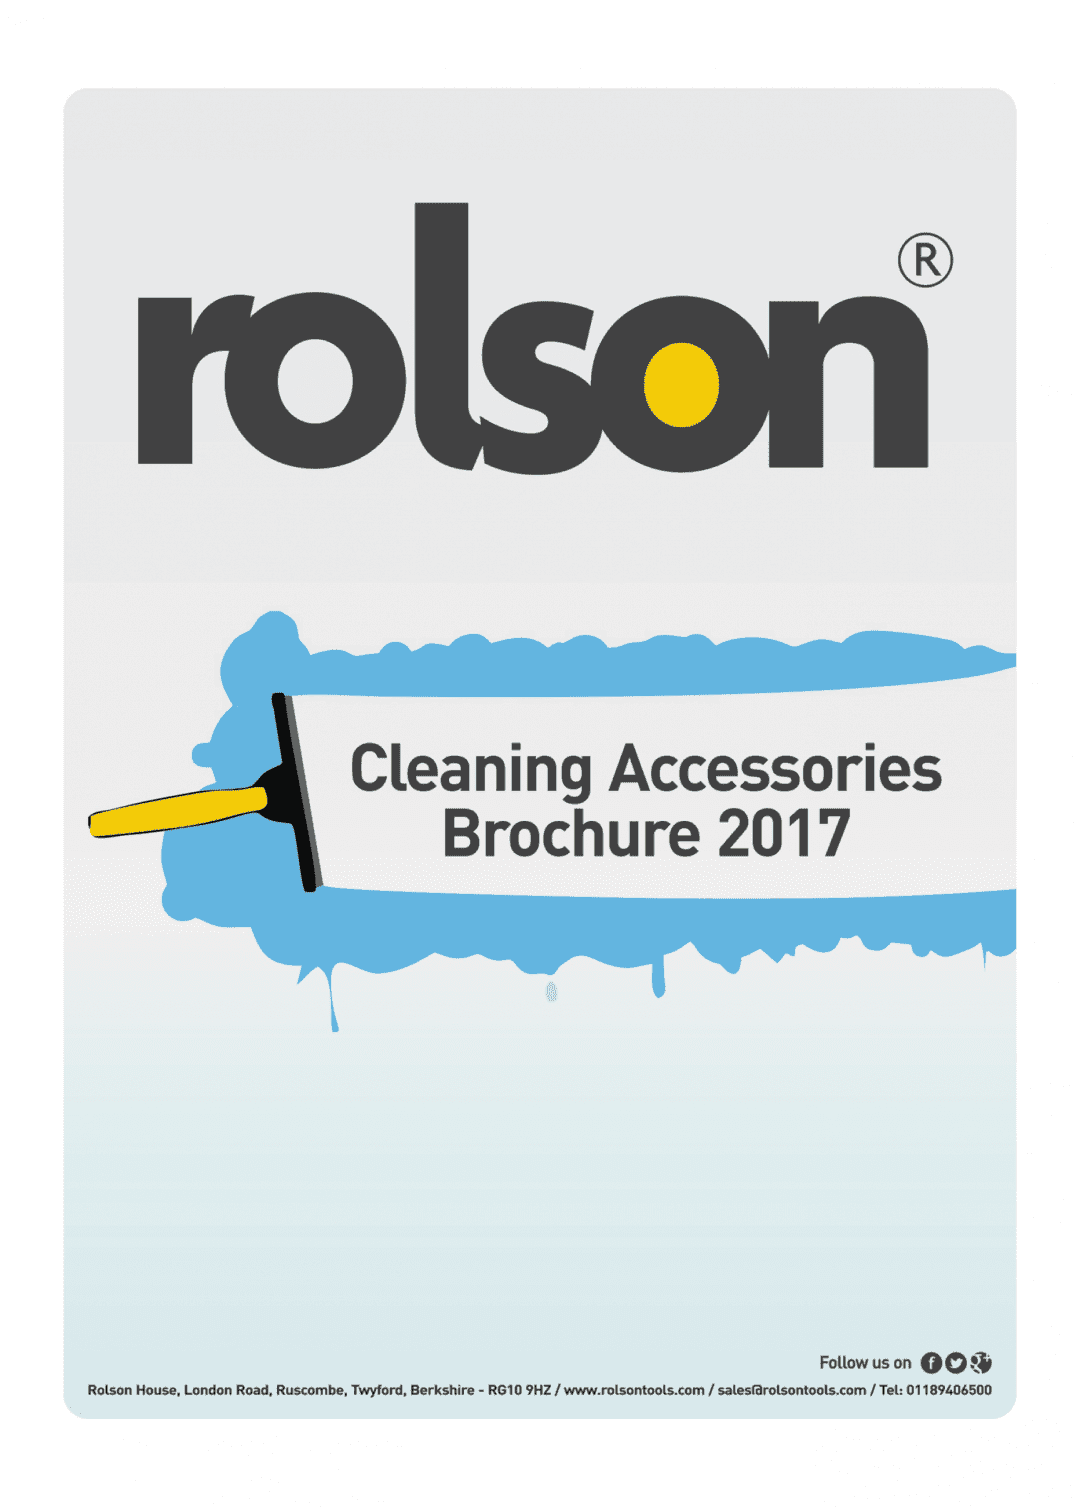 Cleaning Accessories Brochure 2017